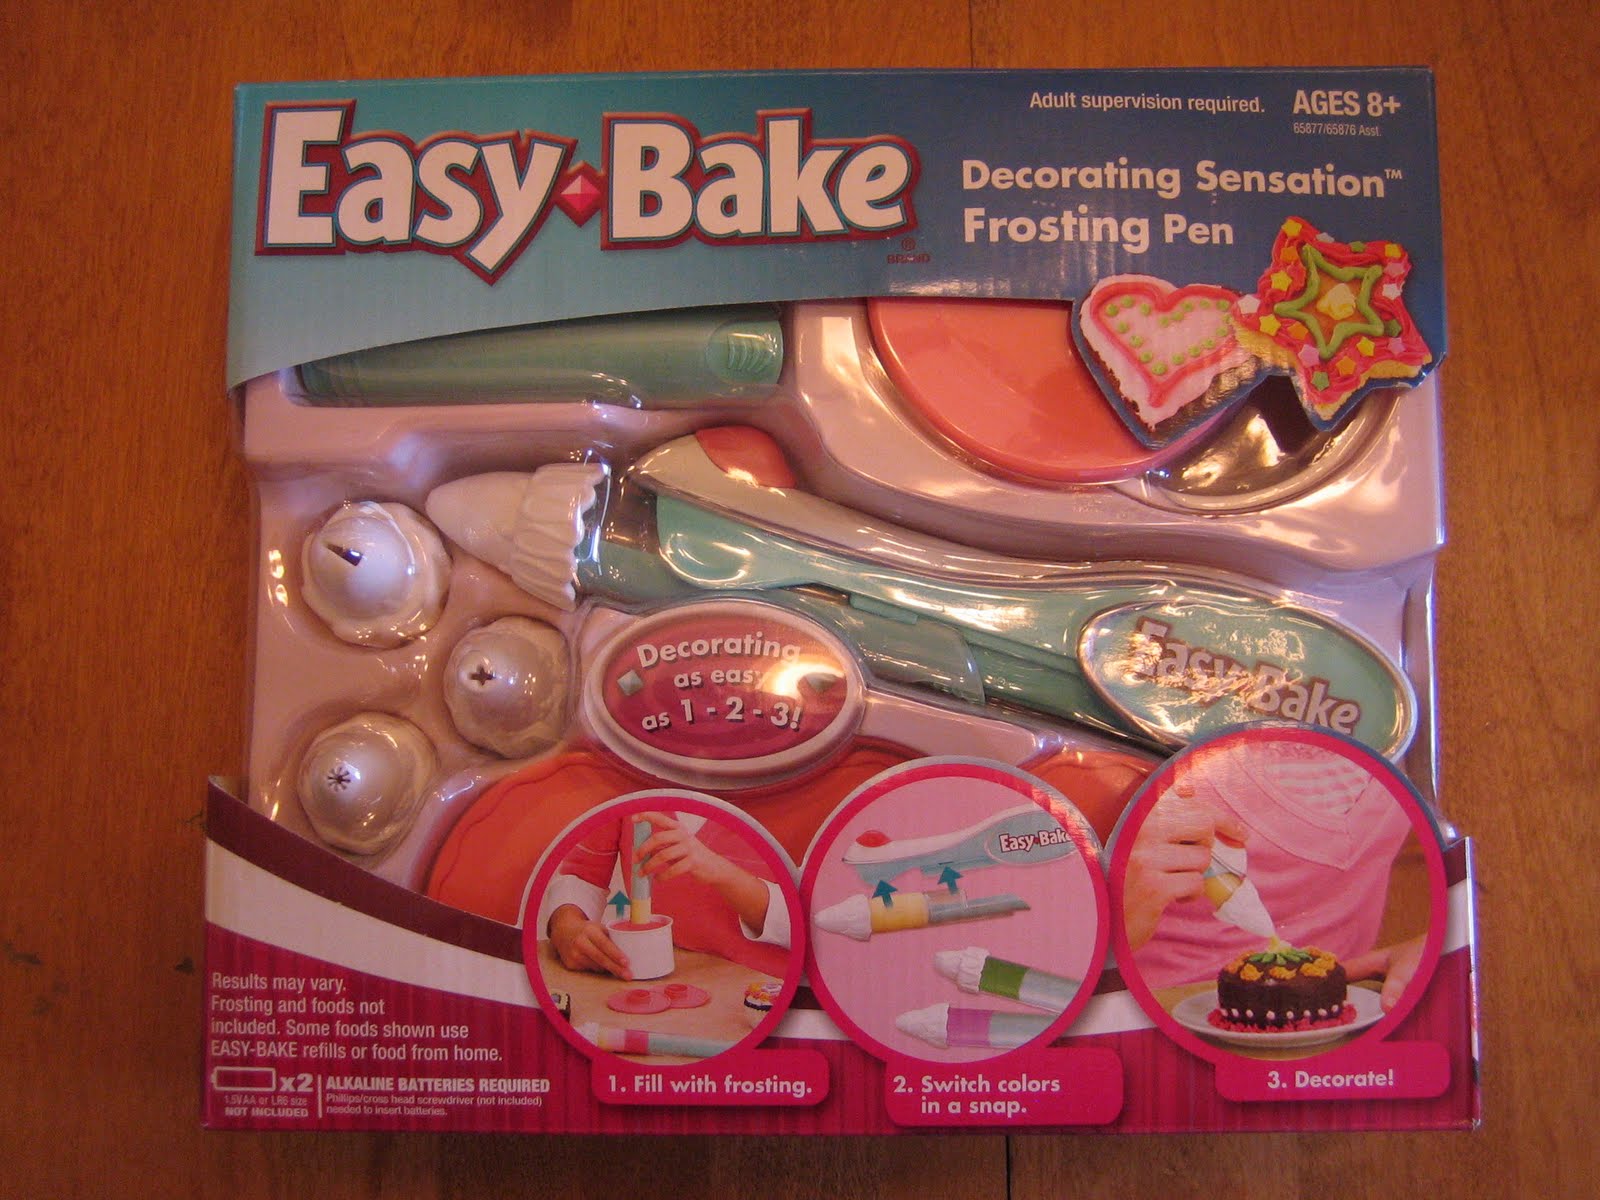 Hyrule Trading Company: Easy Bake Oven plus accessories